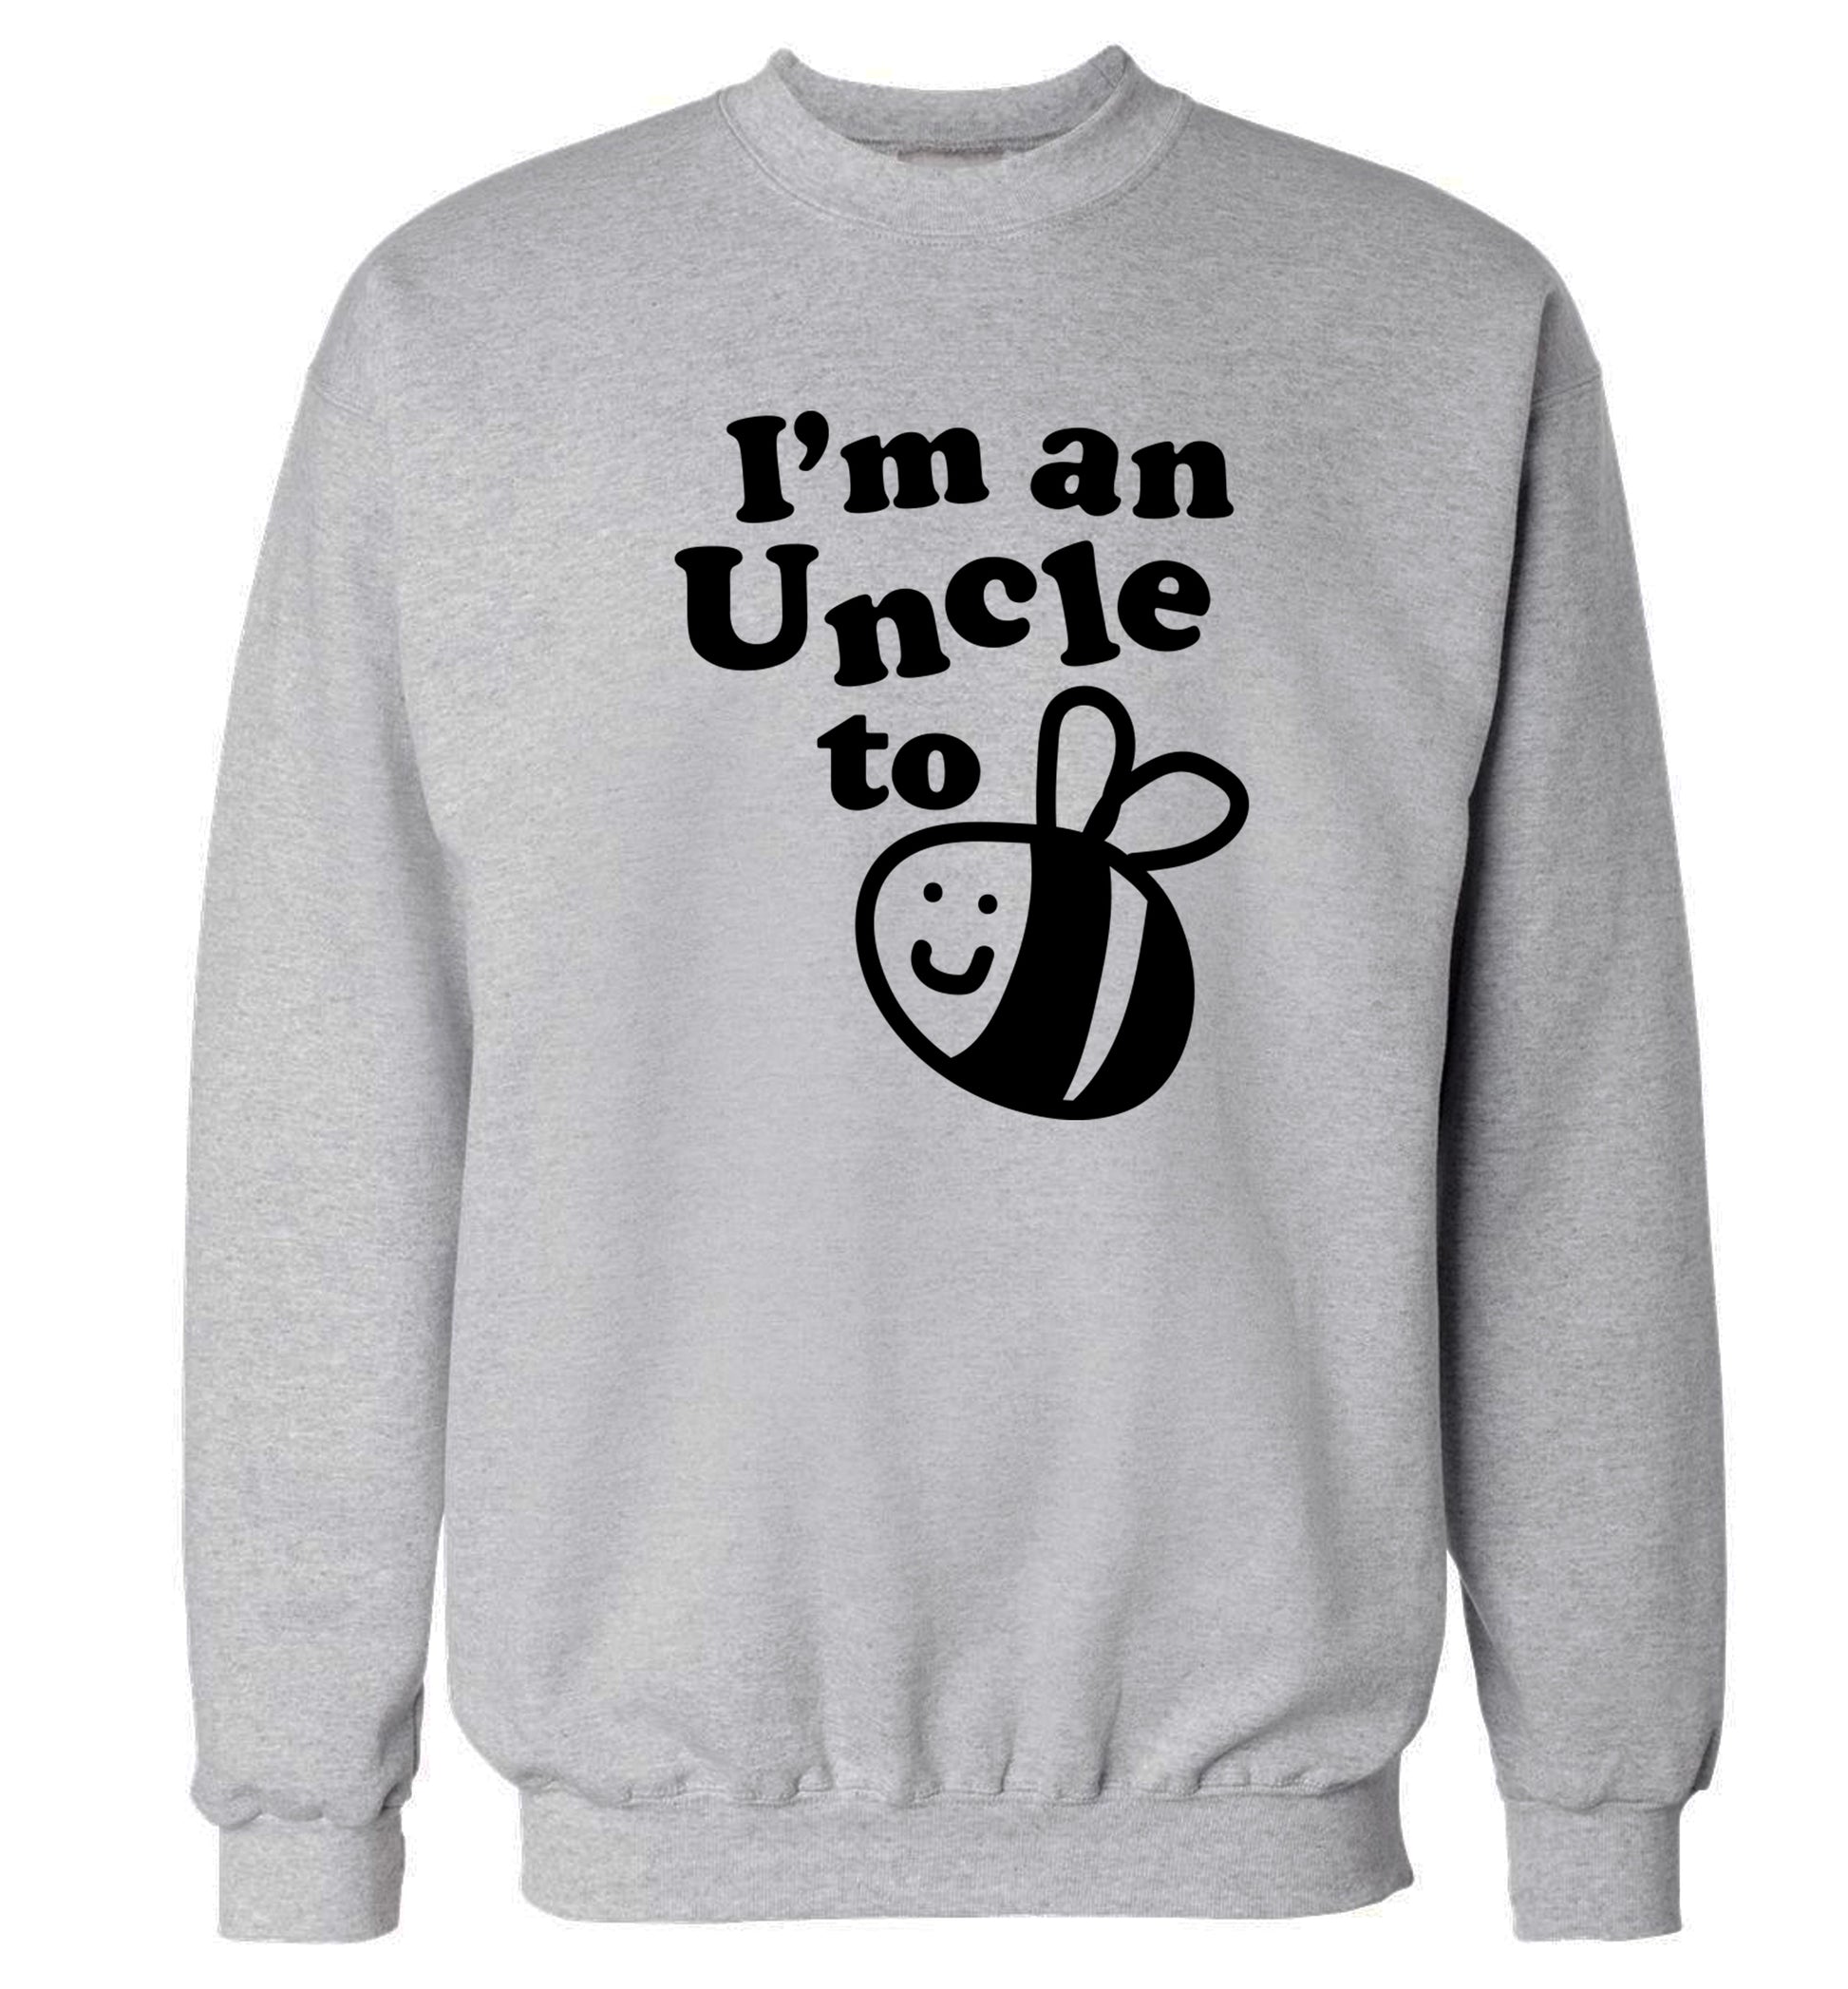 I'm an uncle to be Adult's unisex grey Sweater 2XL